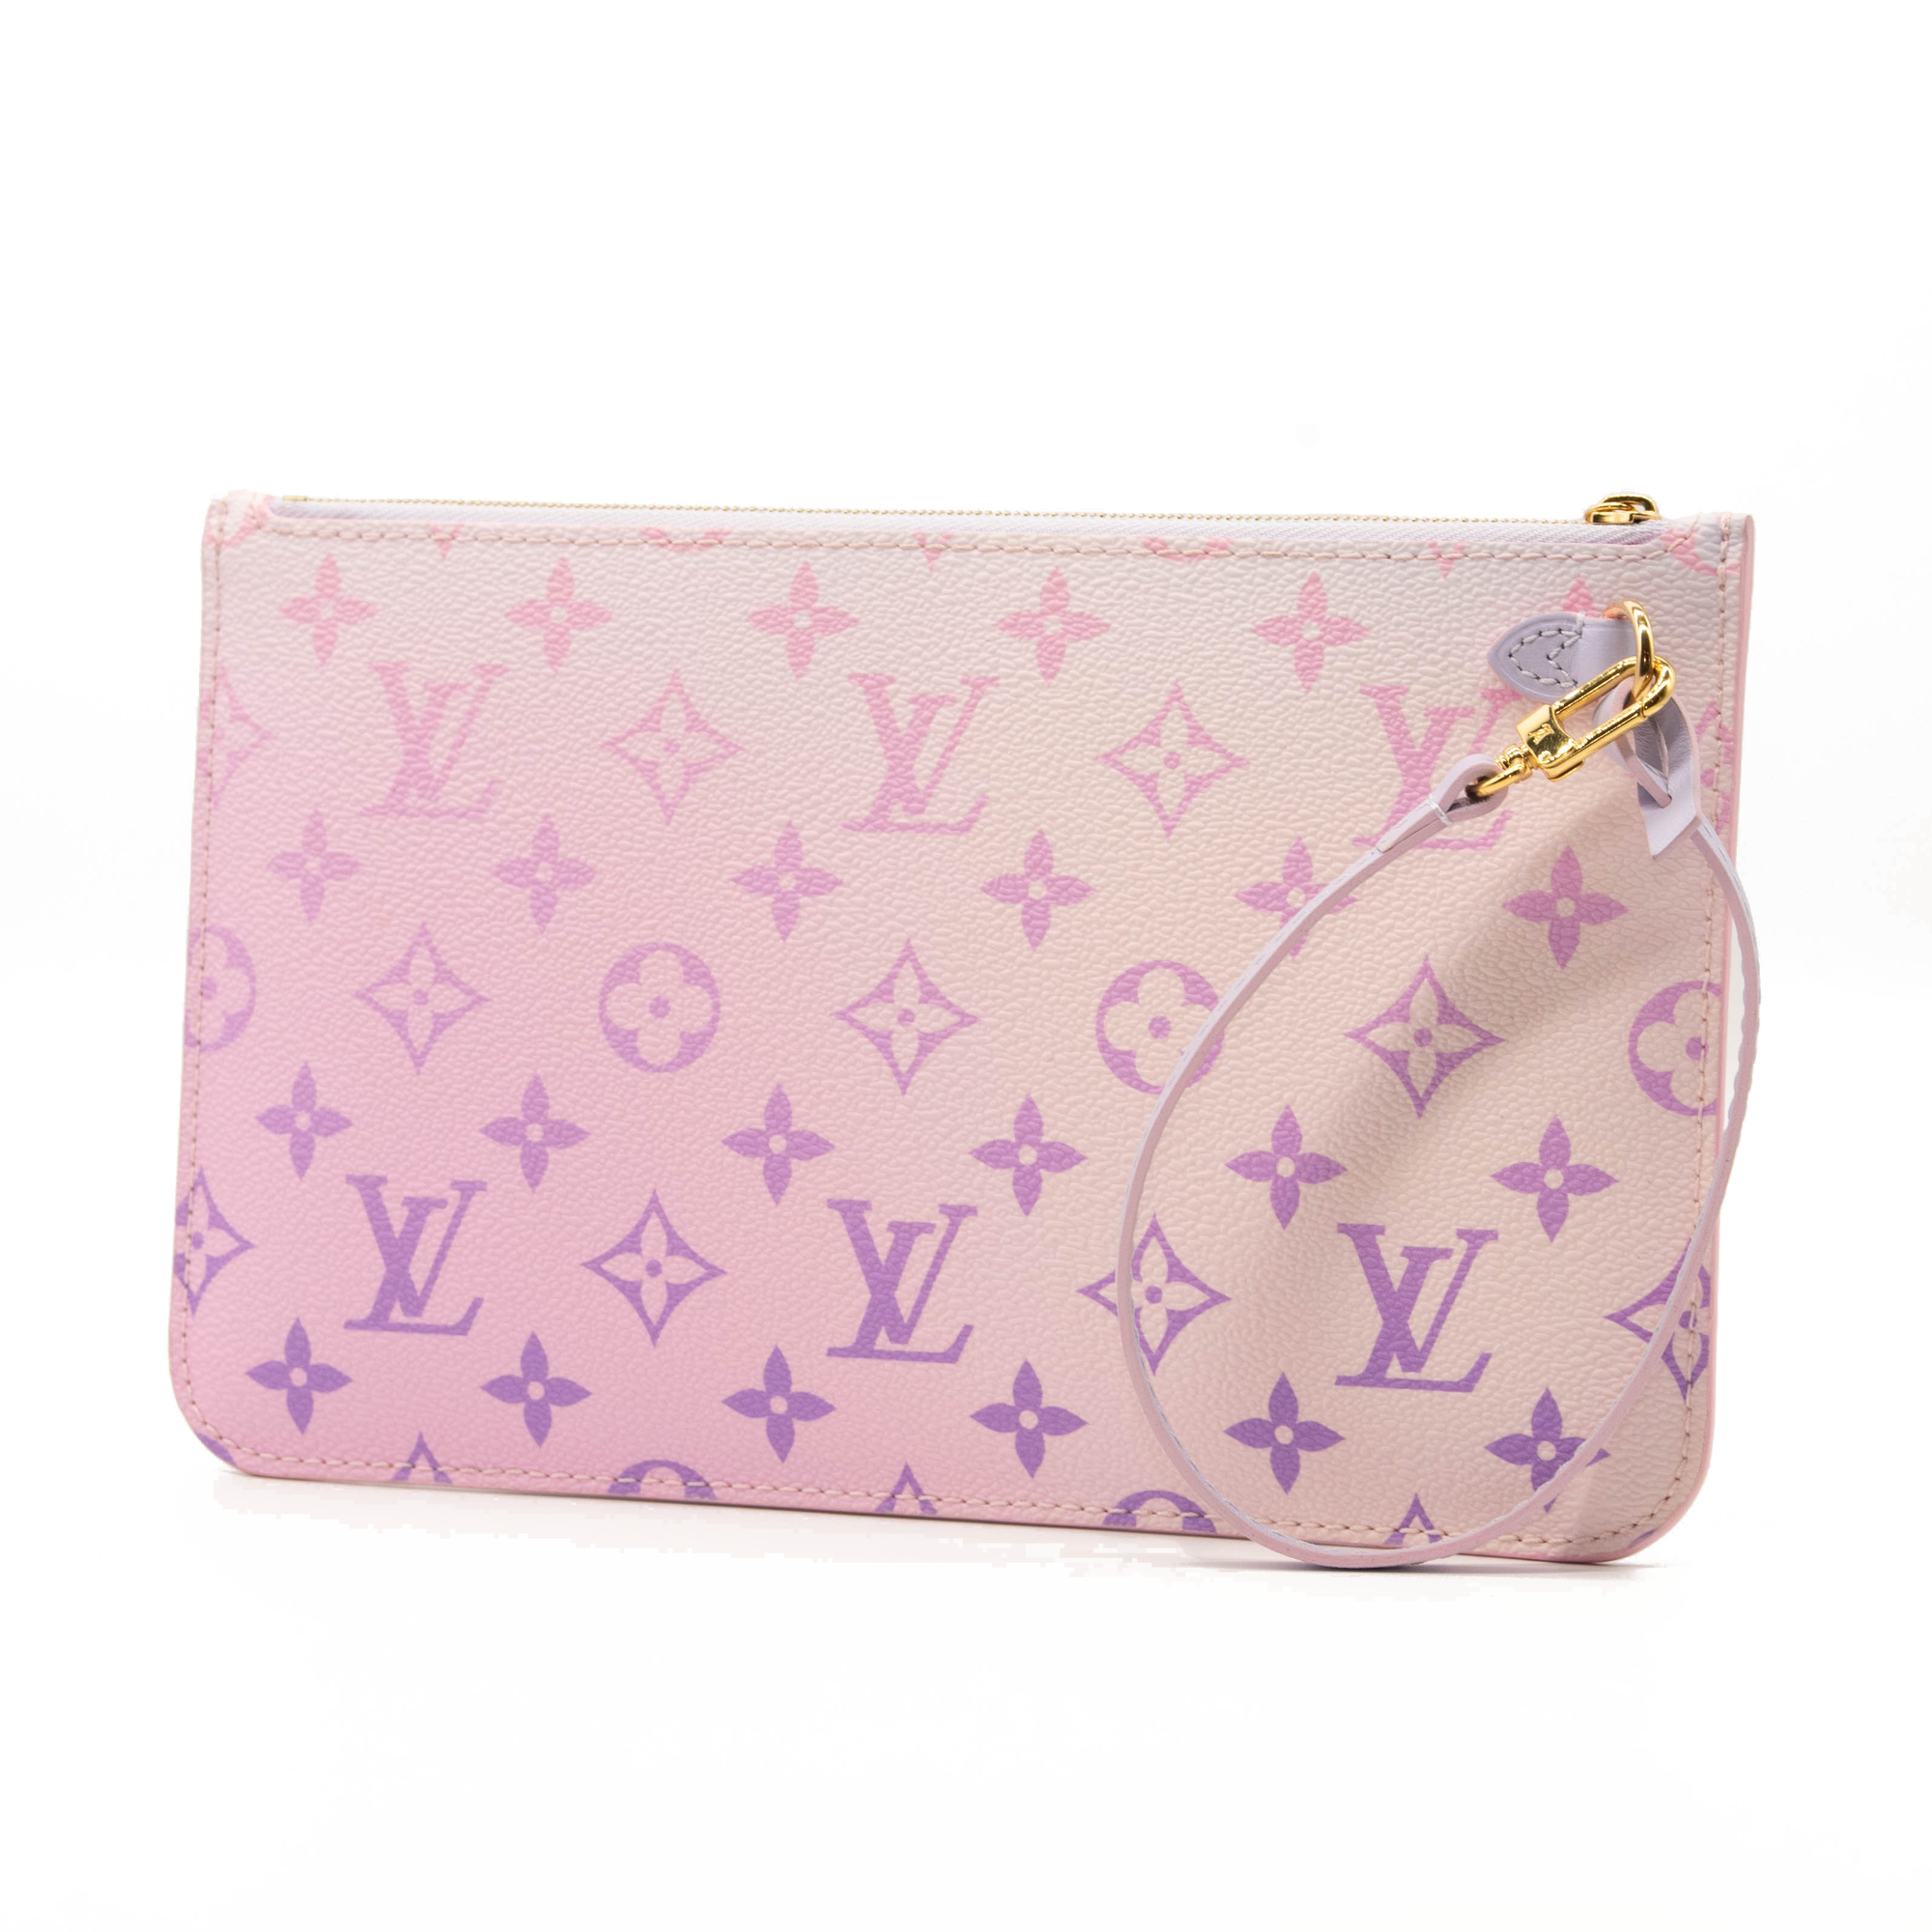 LOUIS VUITTON SPRING IN CITY SUNRISE PASTEL NEVERFULL MM TOTE BAG